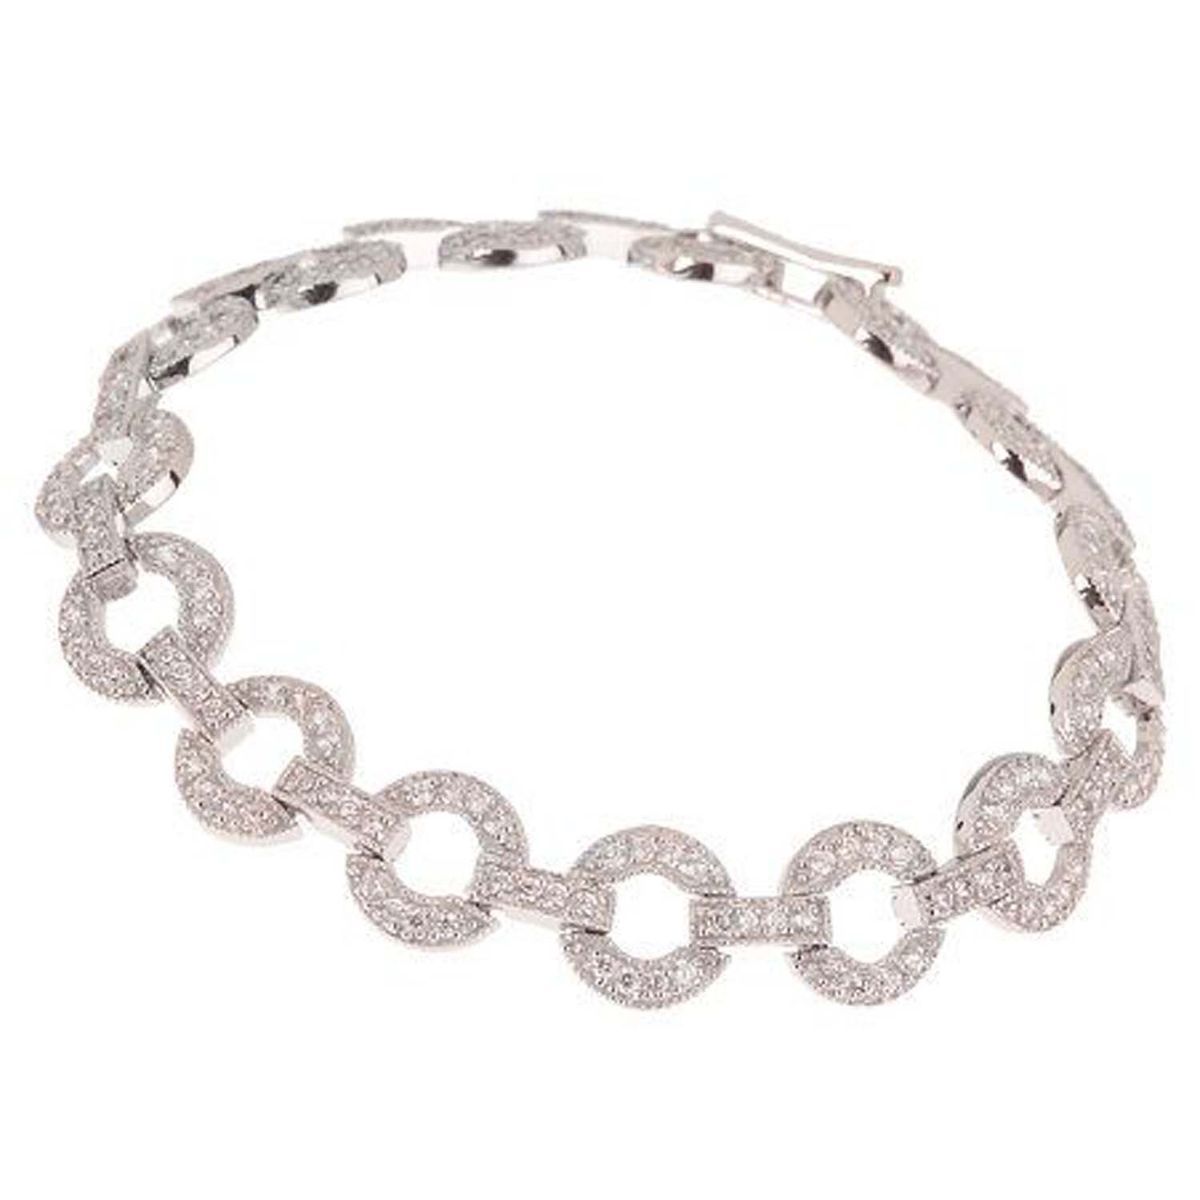   HARLOW INSPIRED STERLING SIMULATED DIAMOND CIRCLE 7 5 LINK BRACELET